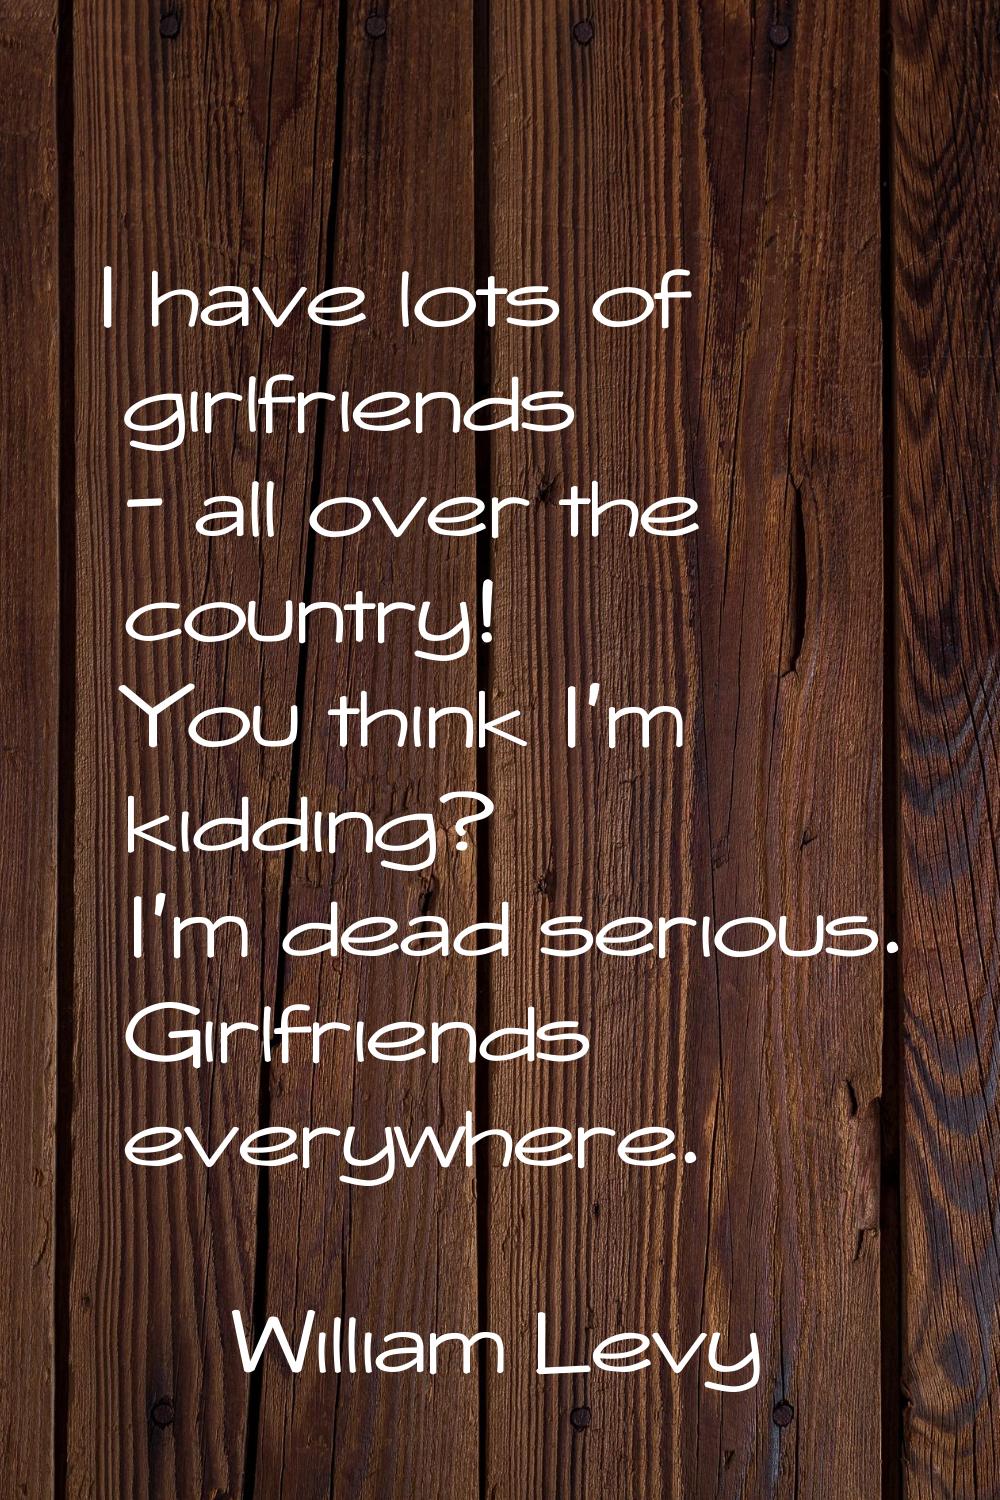 I have lots of girlfriends - all over the country! You think I'm kidding? I'm dead serious. Girlfri